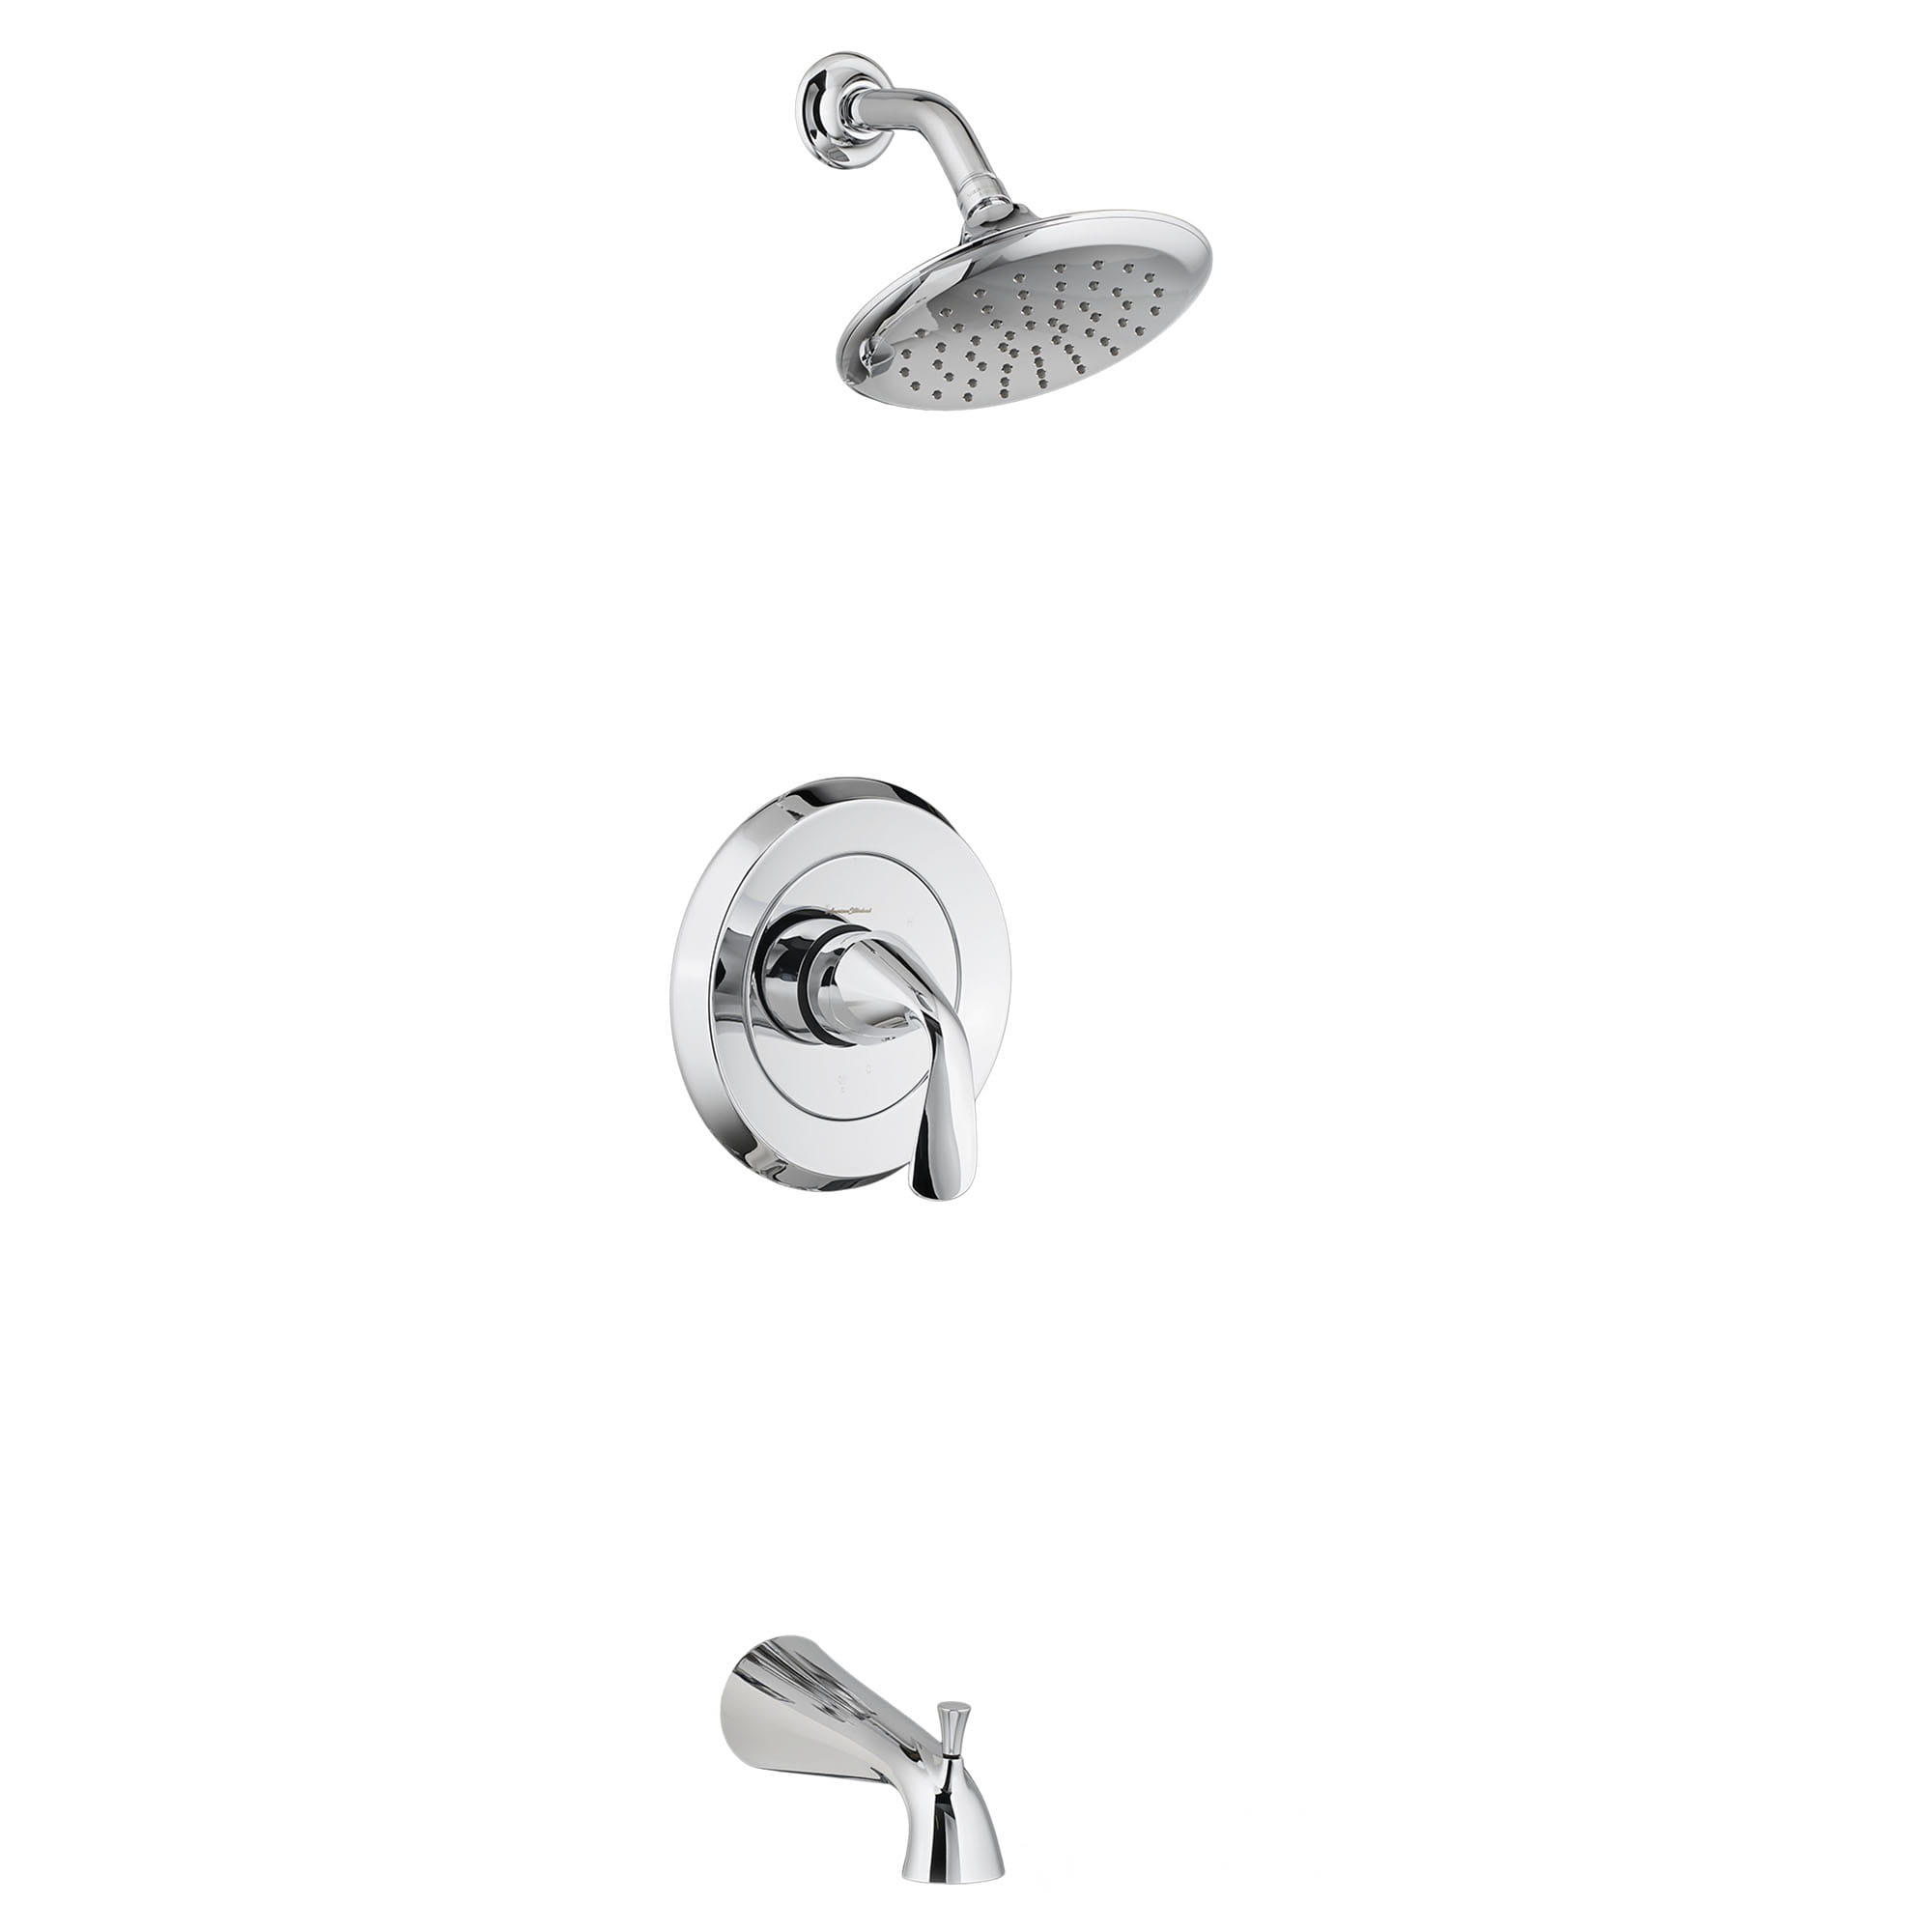 Fluent 18 gpm 68 L min Tub and Shower Trim Kit With Water Saving Showerhead Double Ceramic Pressure Balance Cartridge With Lever Handle CHROME